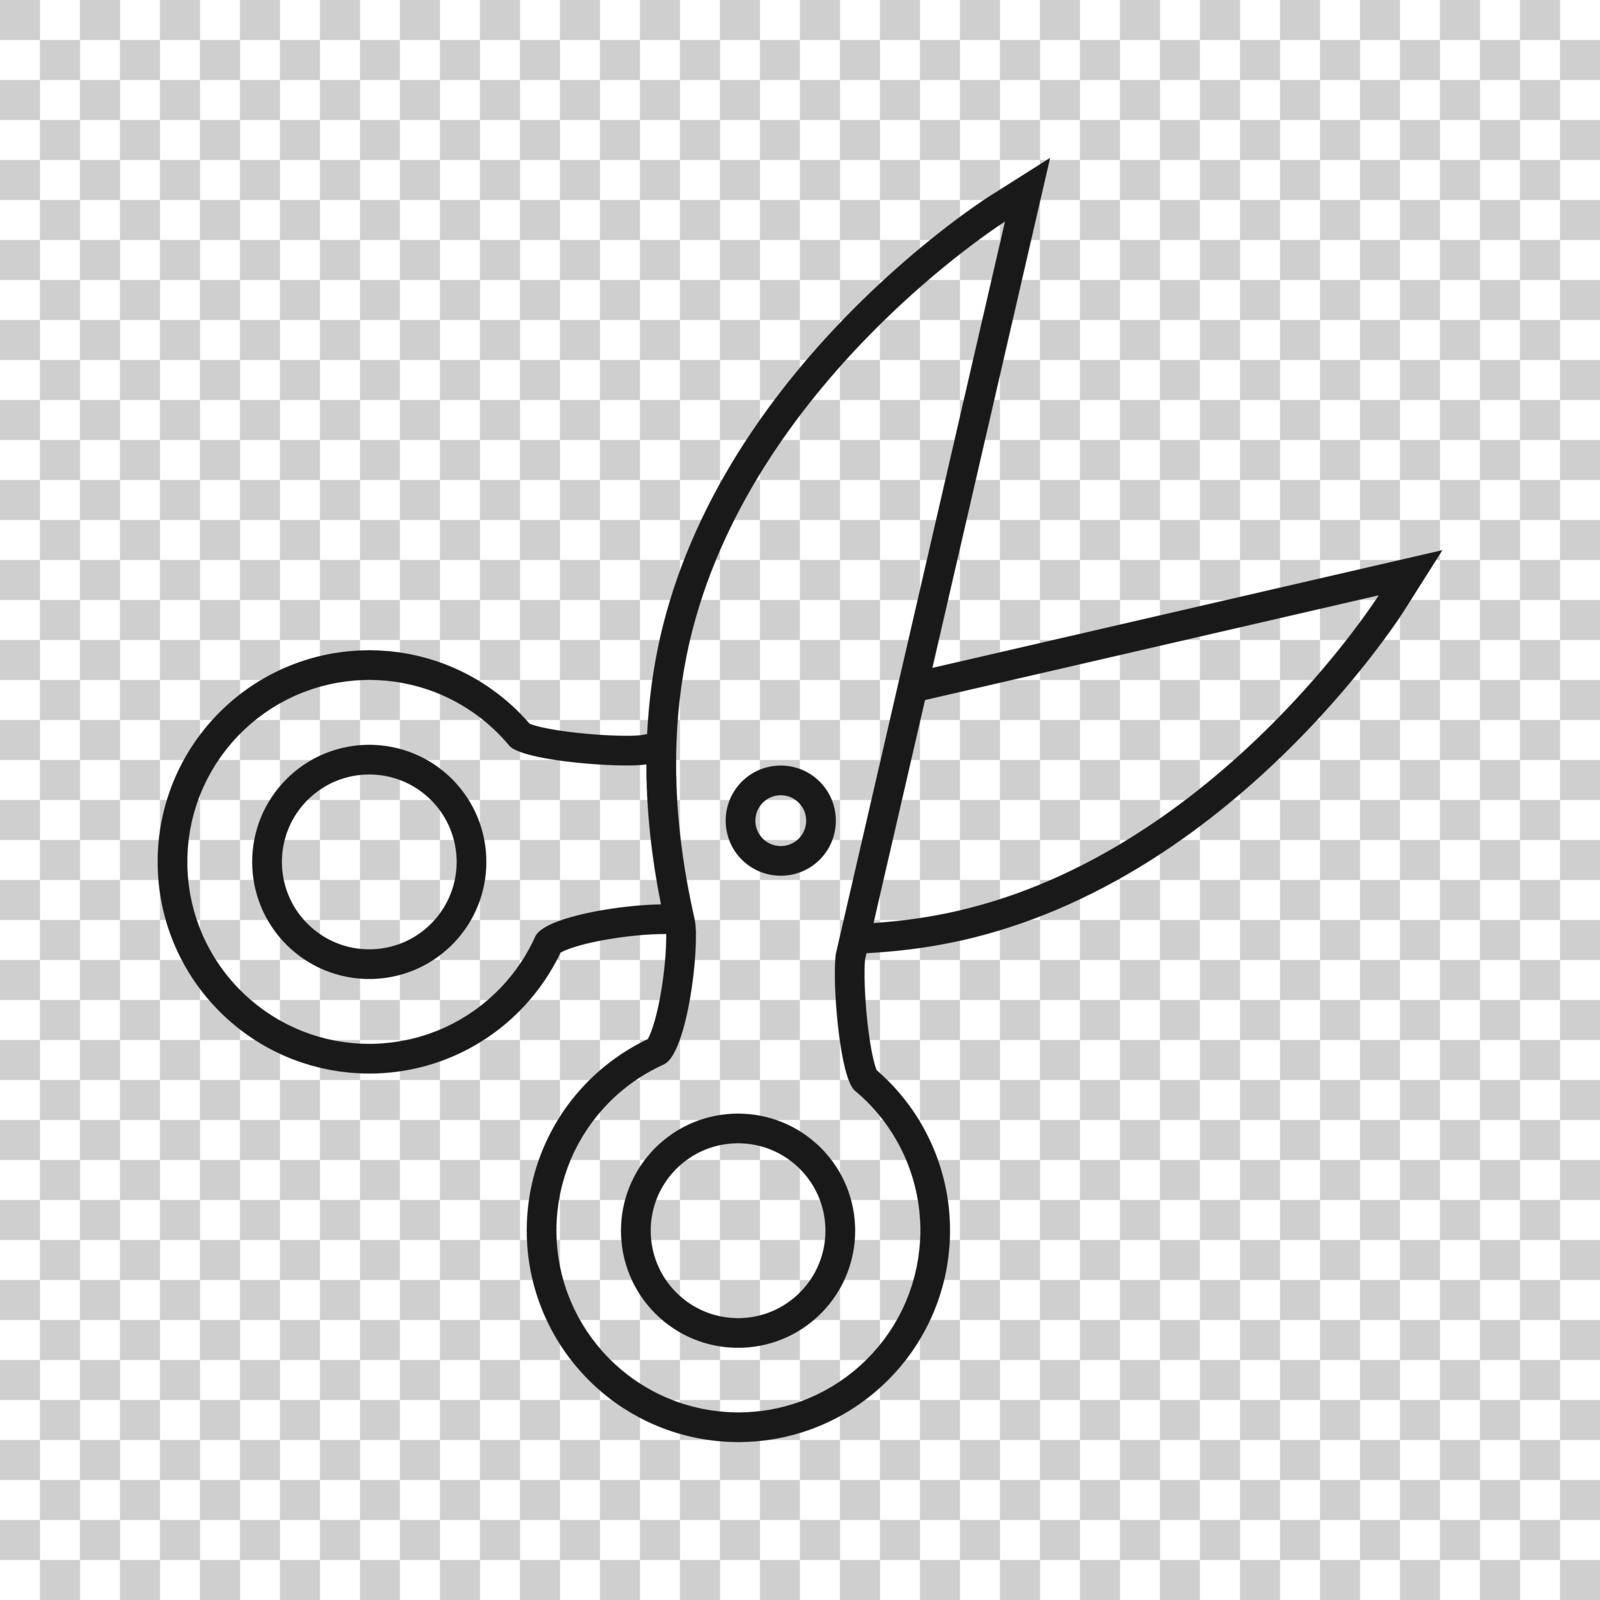 Scissor icon in flat style. Cut equipment vector illustration on white isolated background. Cutter business concept.